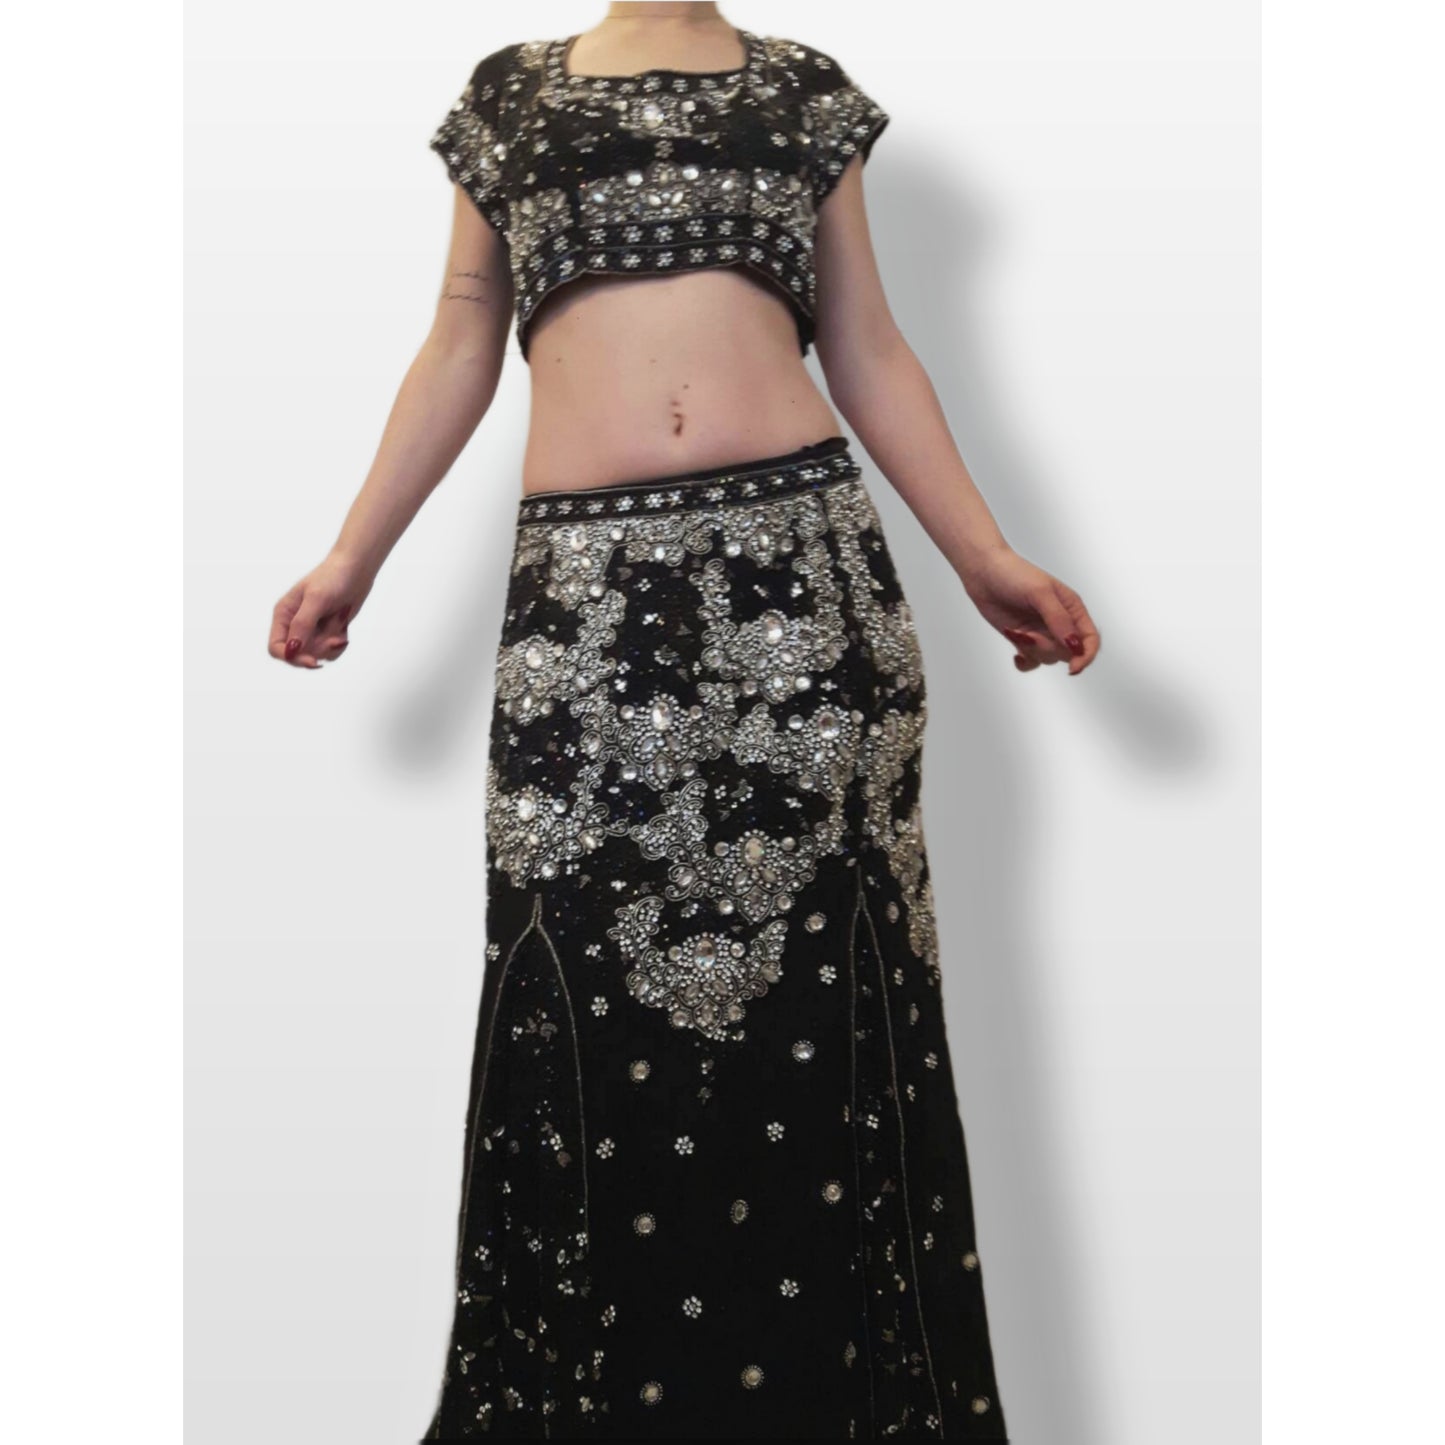 Top quality vintage lengha skirt and choli top in silver and black with beautiful crystal hand embroidery and irredecent sequins (size M)